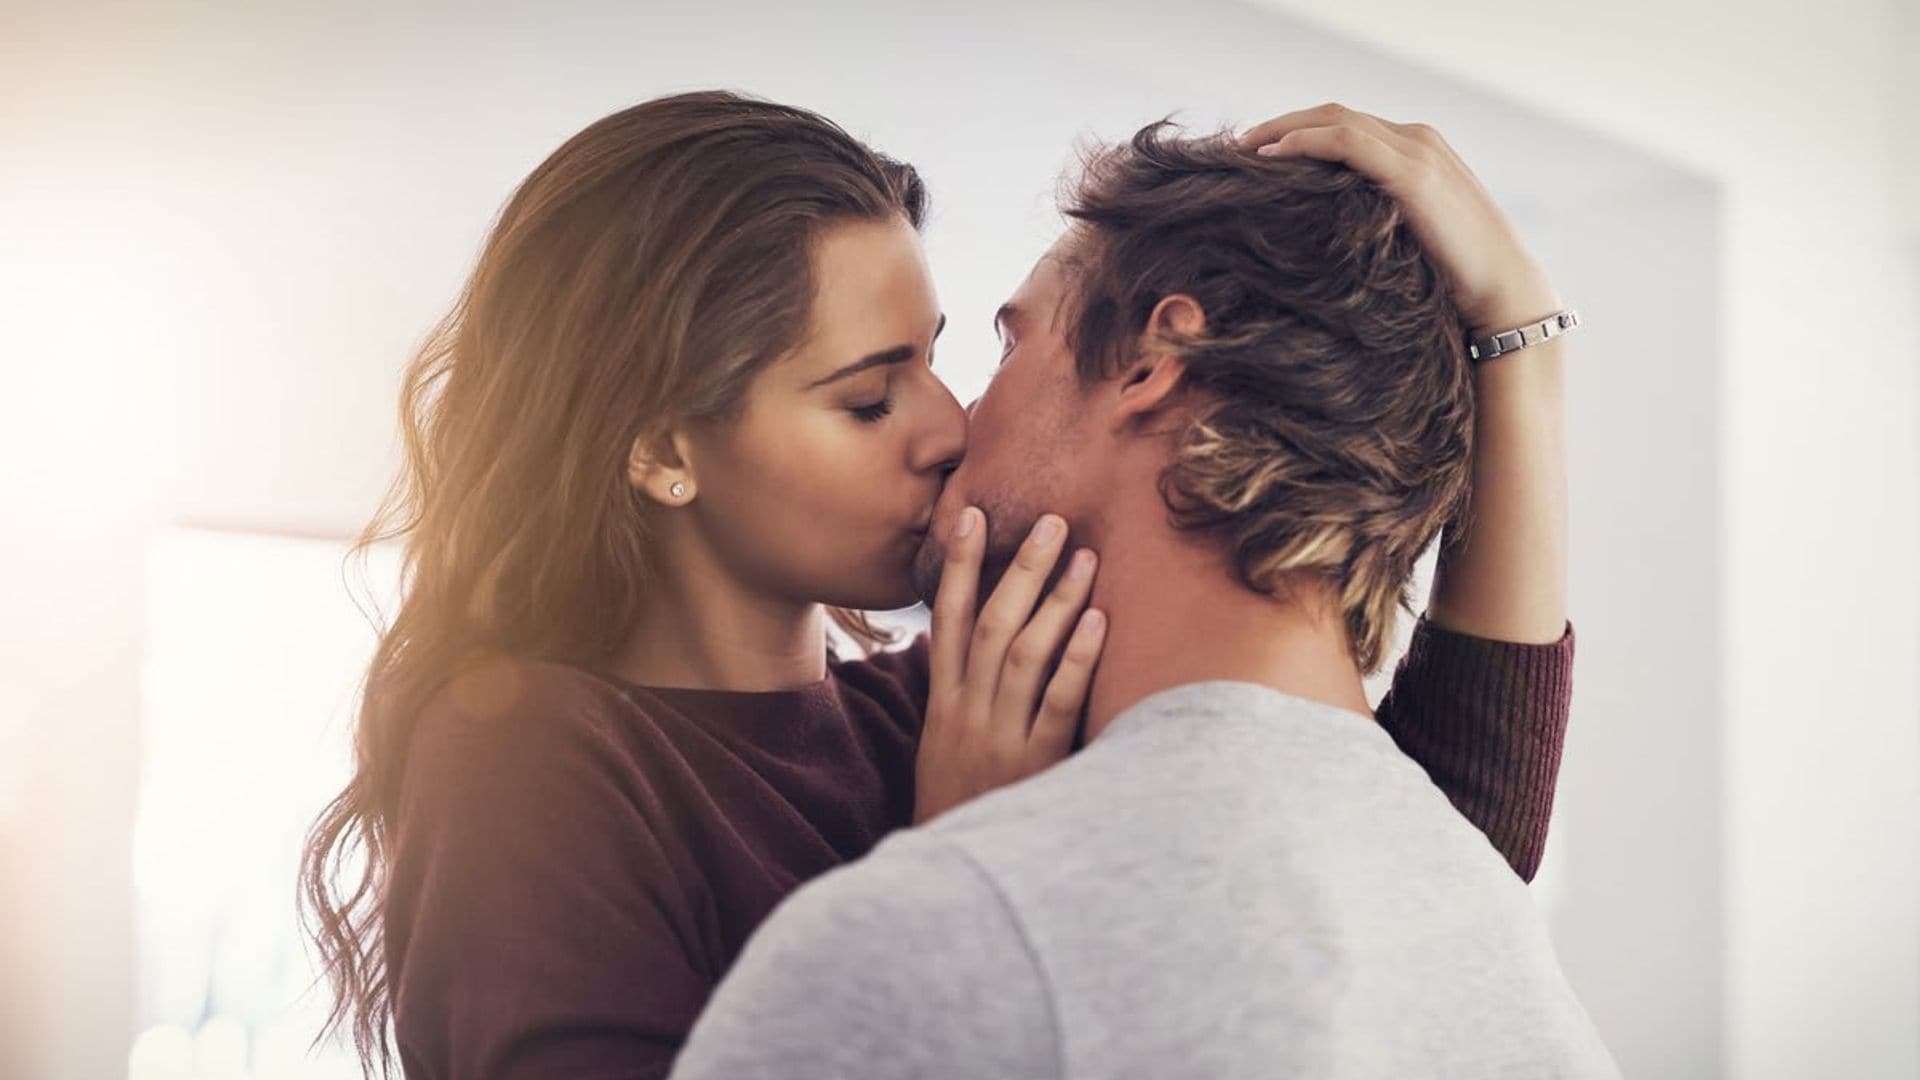 International Kissing Day: proven health benefits of giving someone a kiss